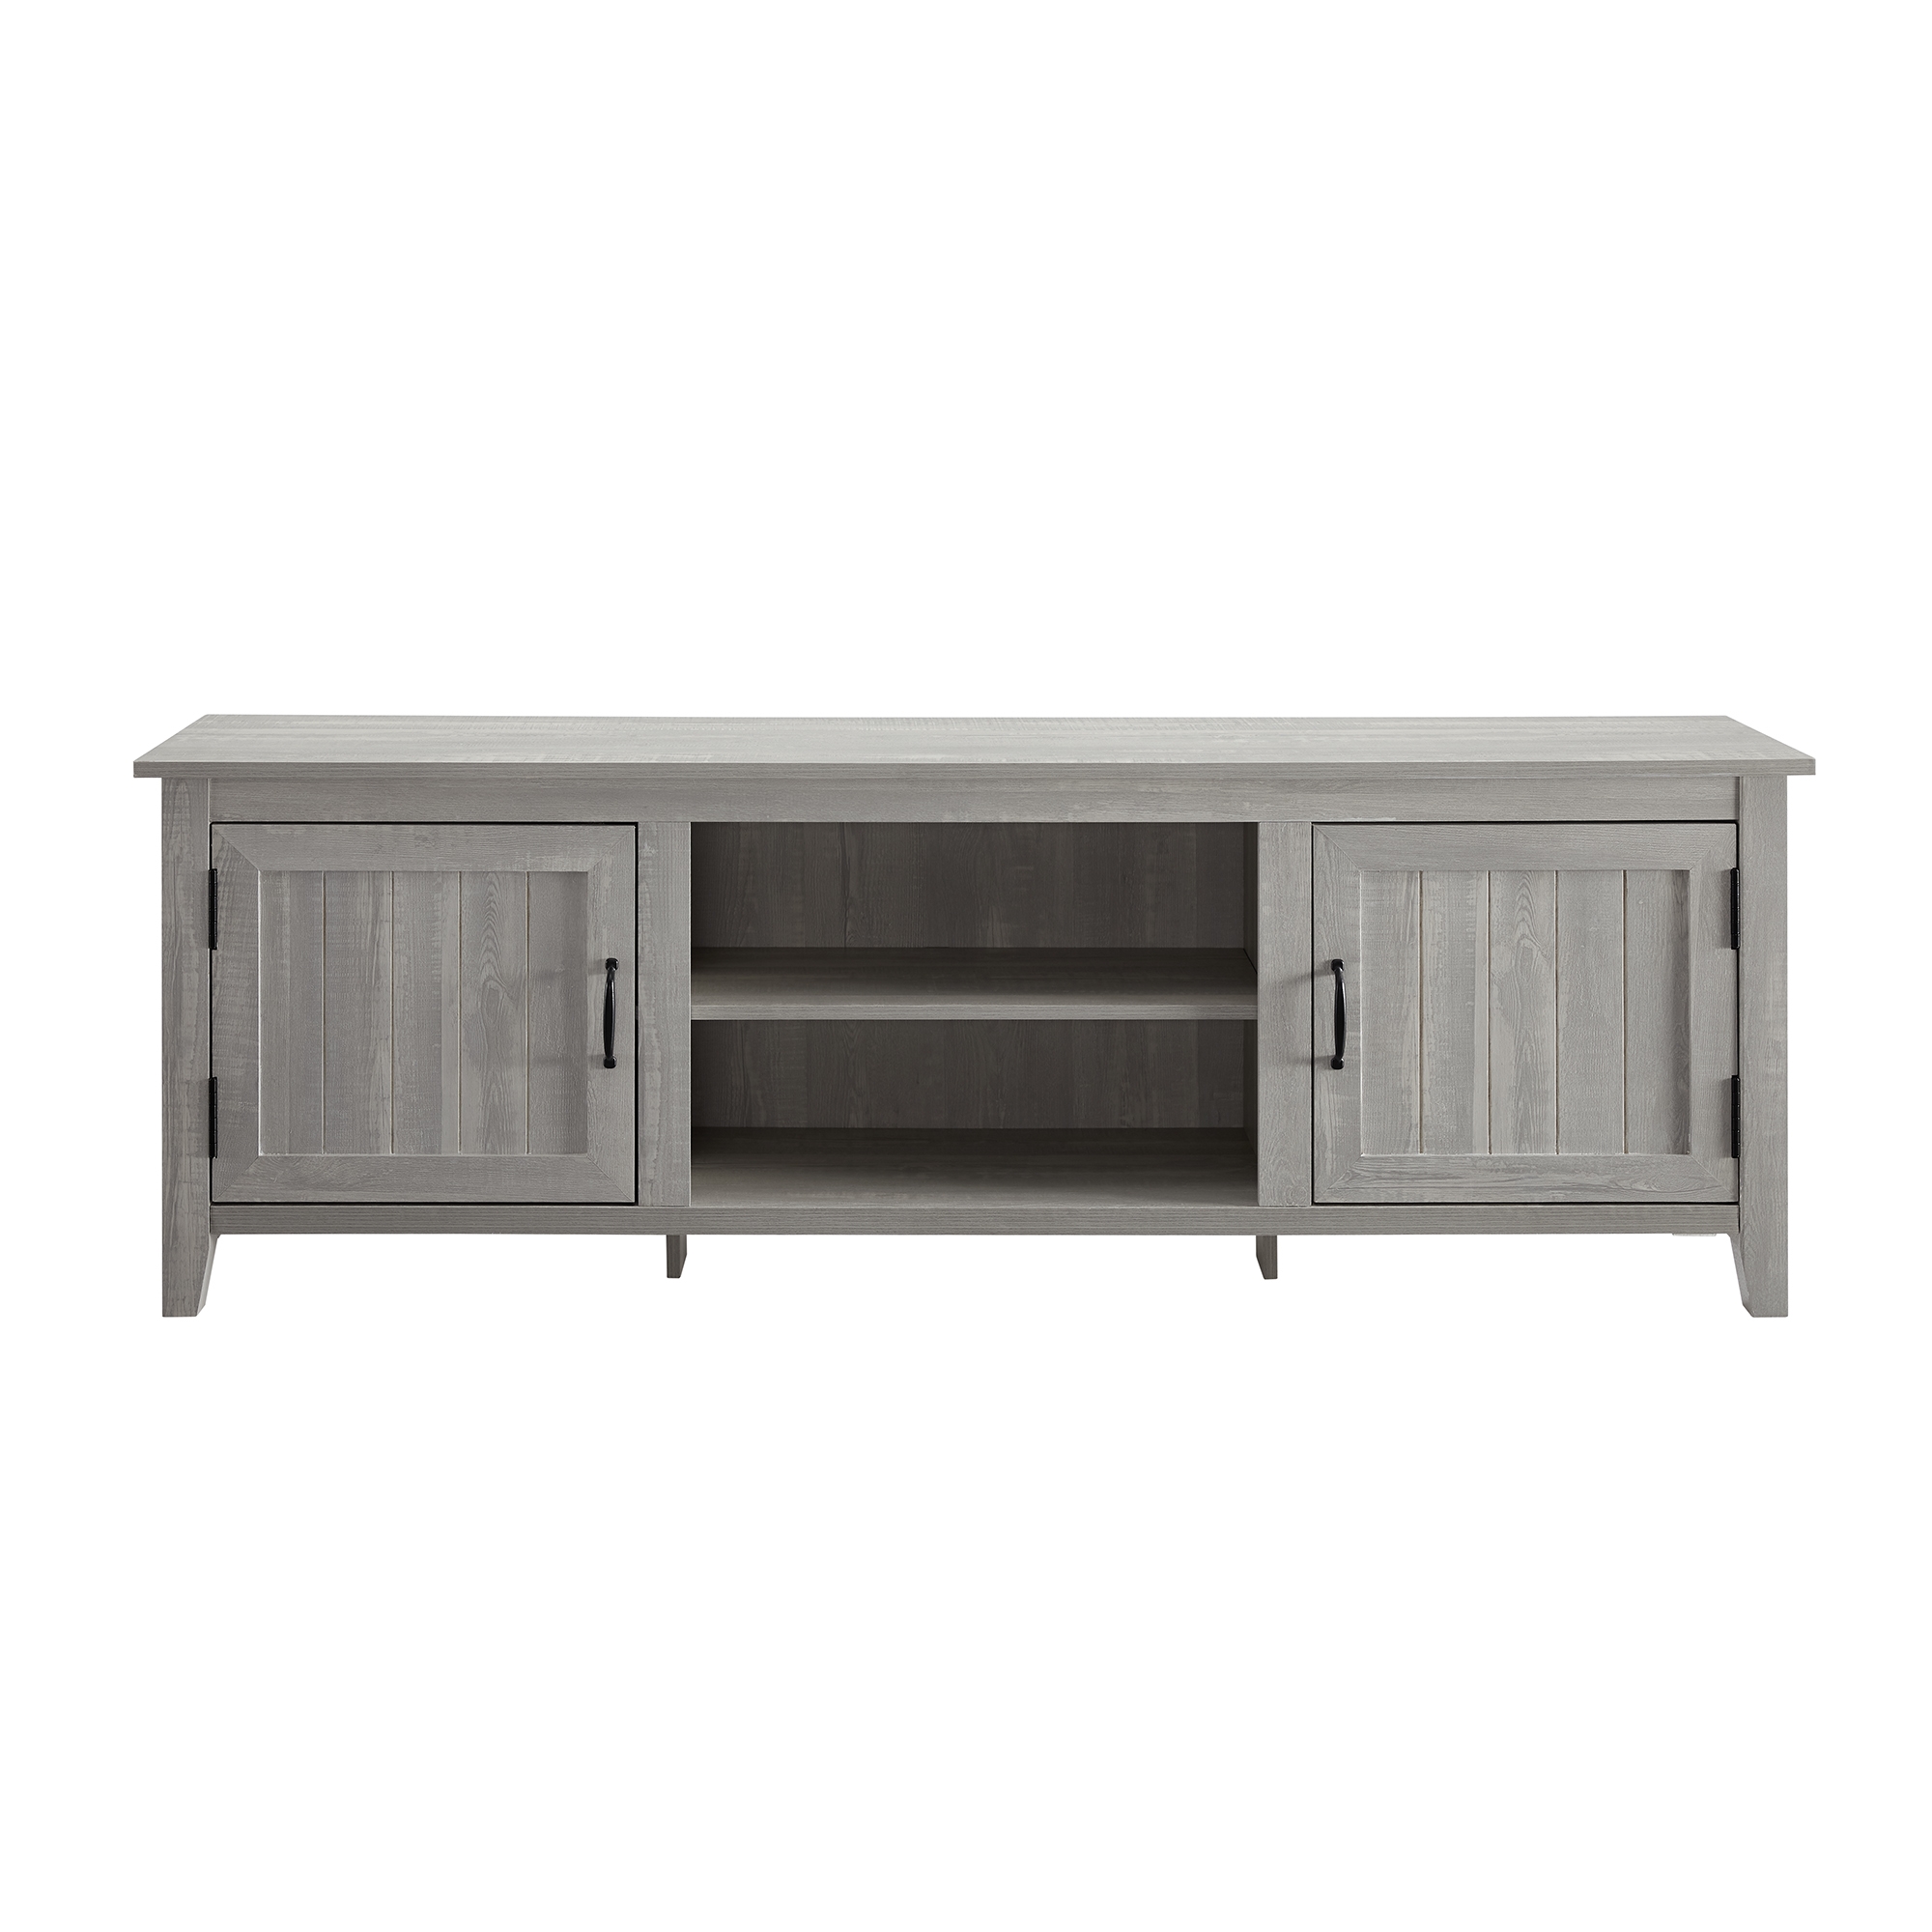 70" Modern Farmhouse Simple Grooved Door Wood TV Stand - Stone Grey - Image 1